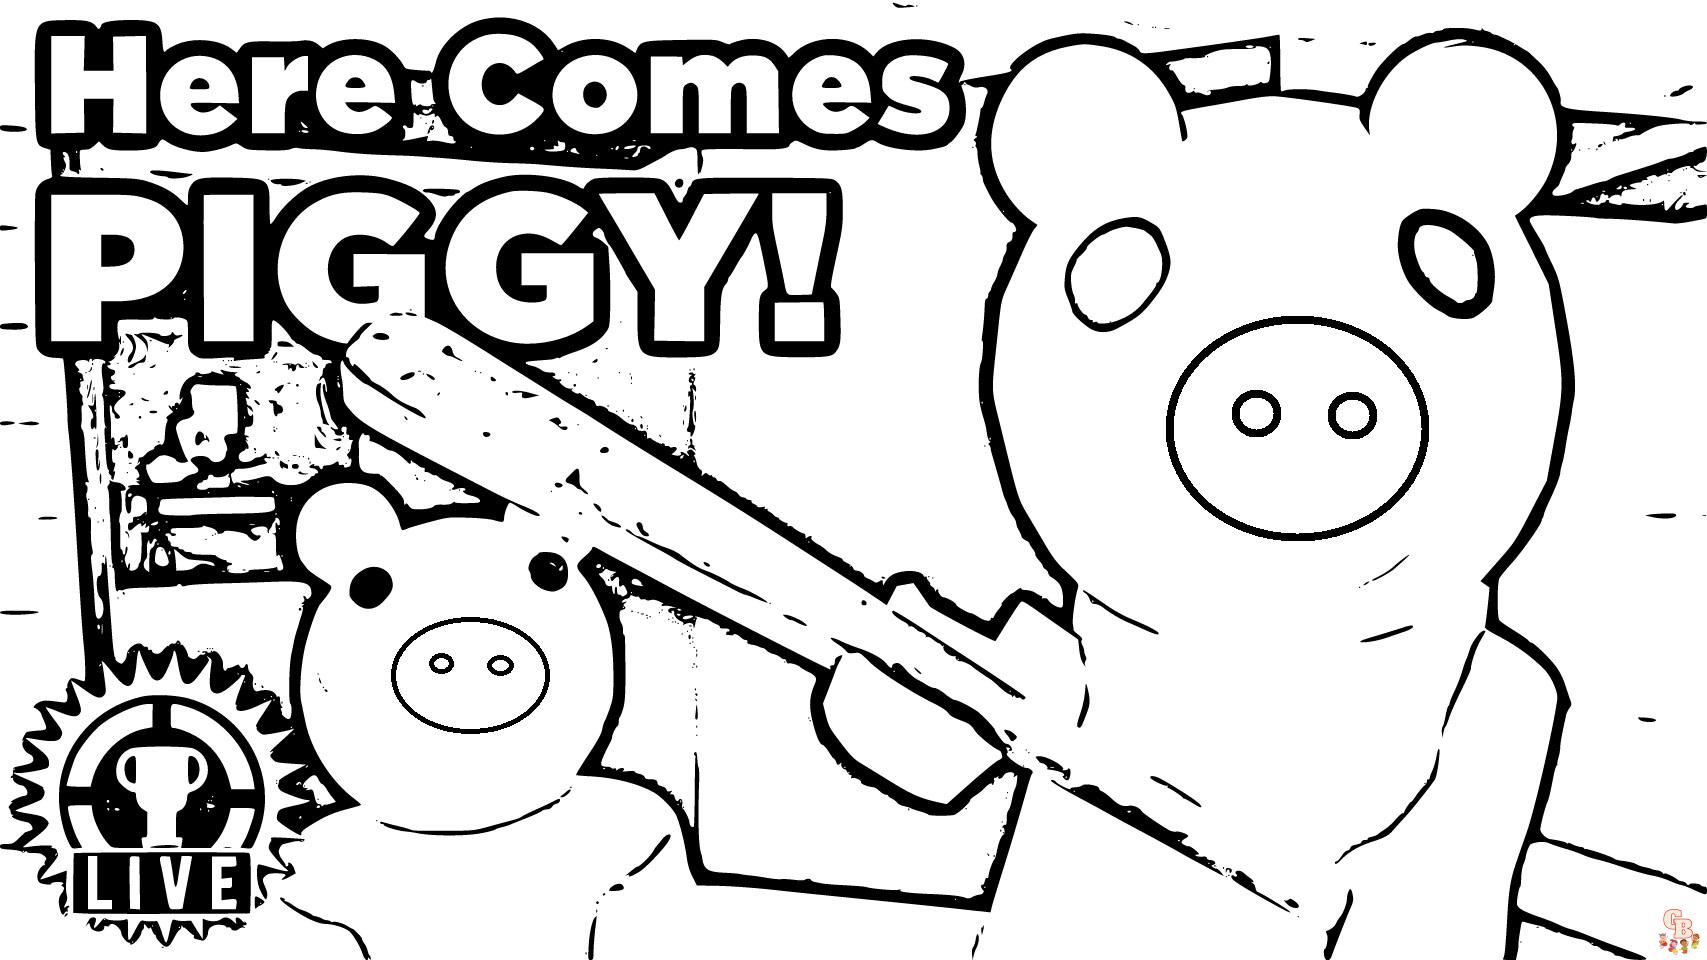 Discover Fun and Excitement with Piggy Roblox Coloring Pages